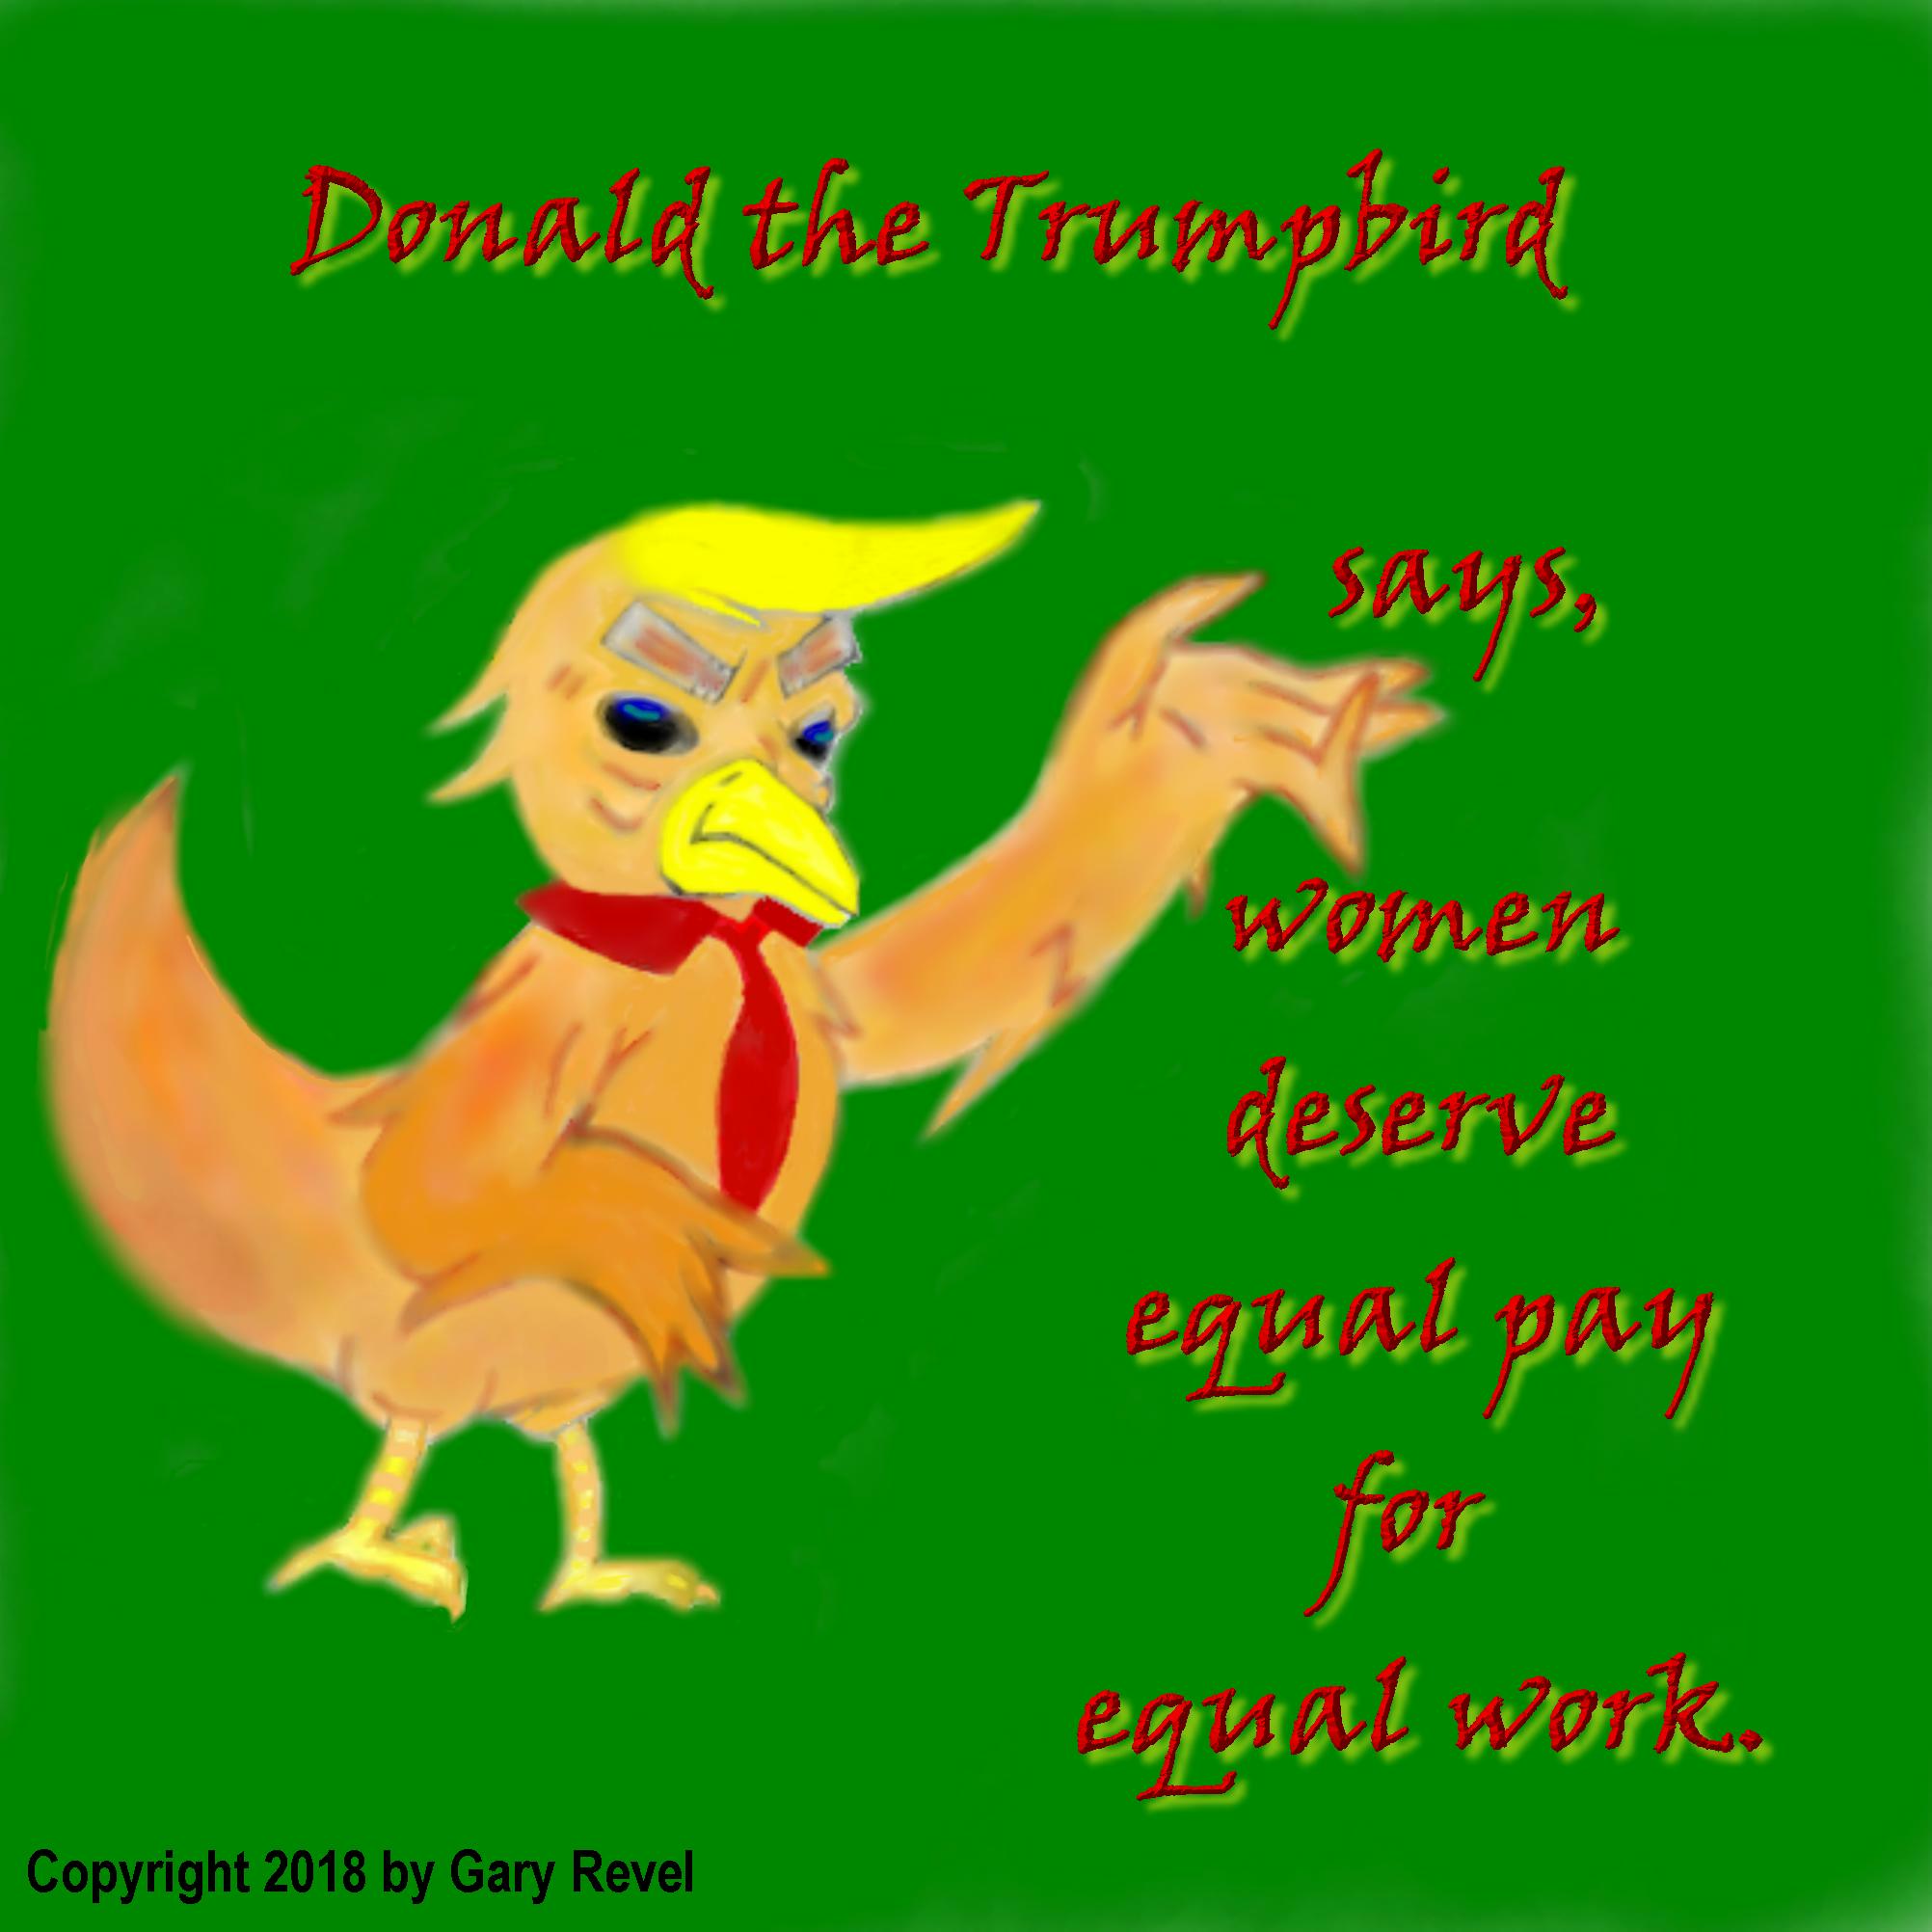 Donald the Trumpbird says equal pay for women